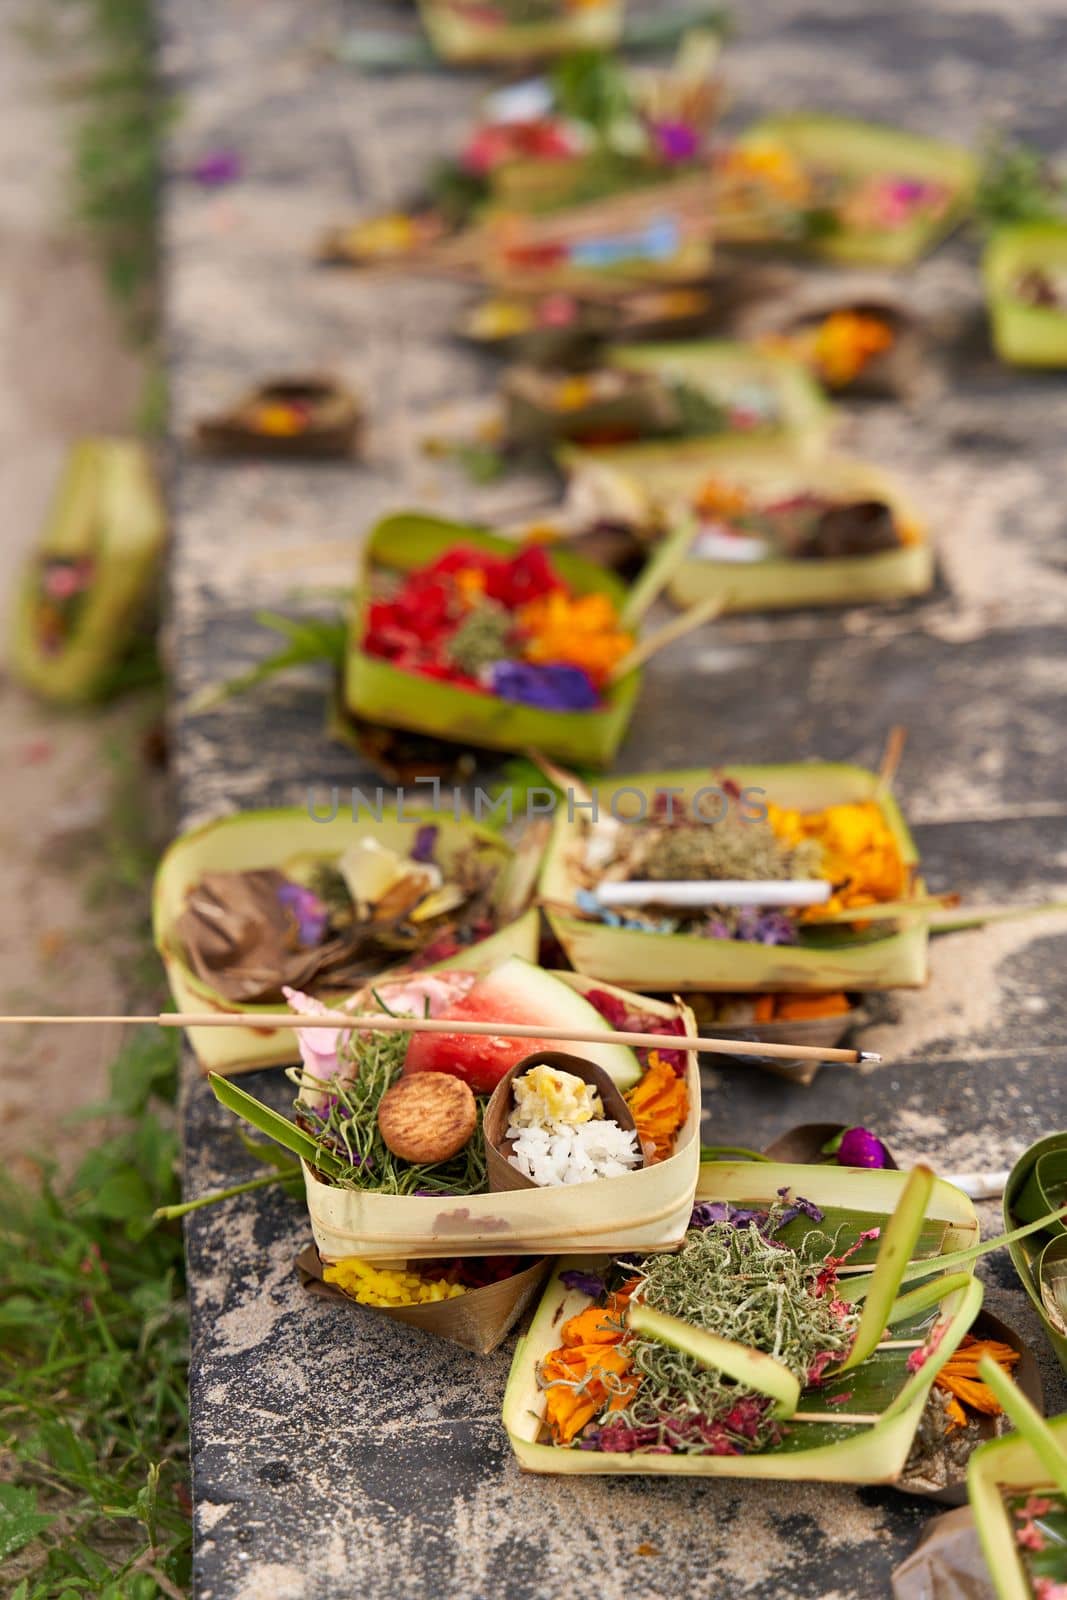 The layout on the ground of traditional offerings for the spirits on the island of Bali by Try_my_best